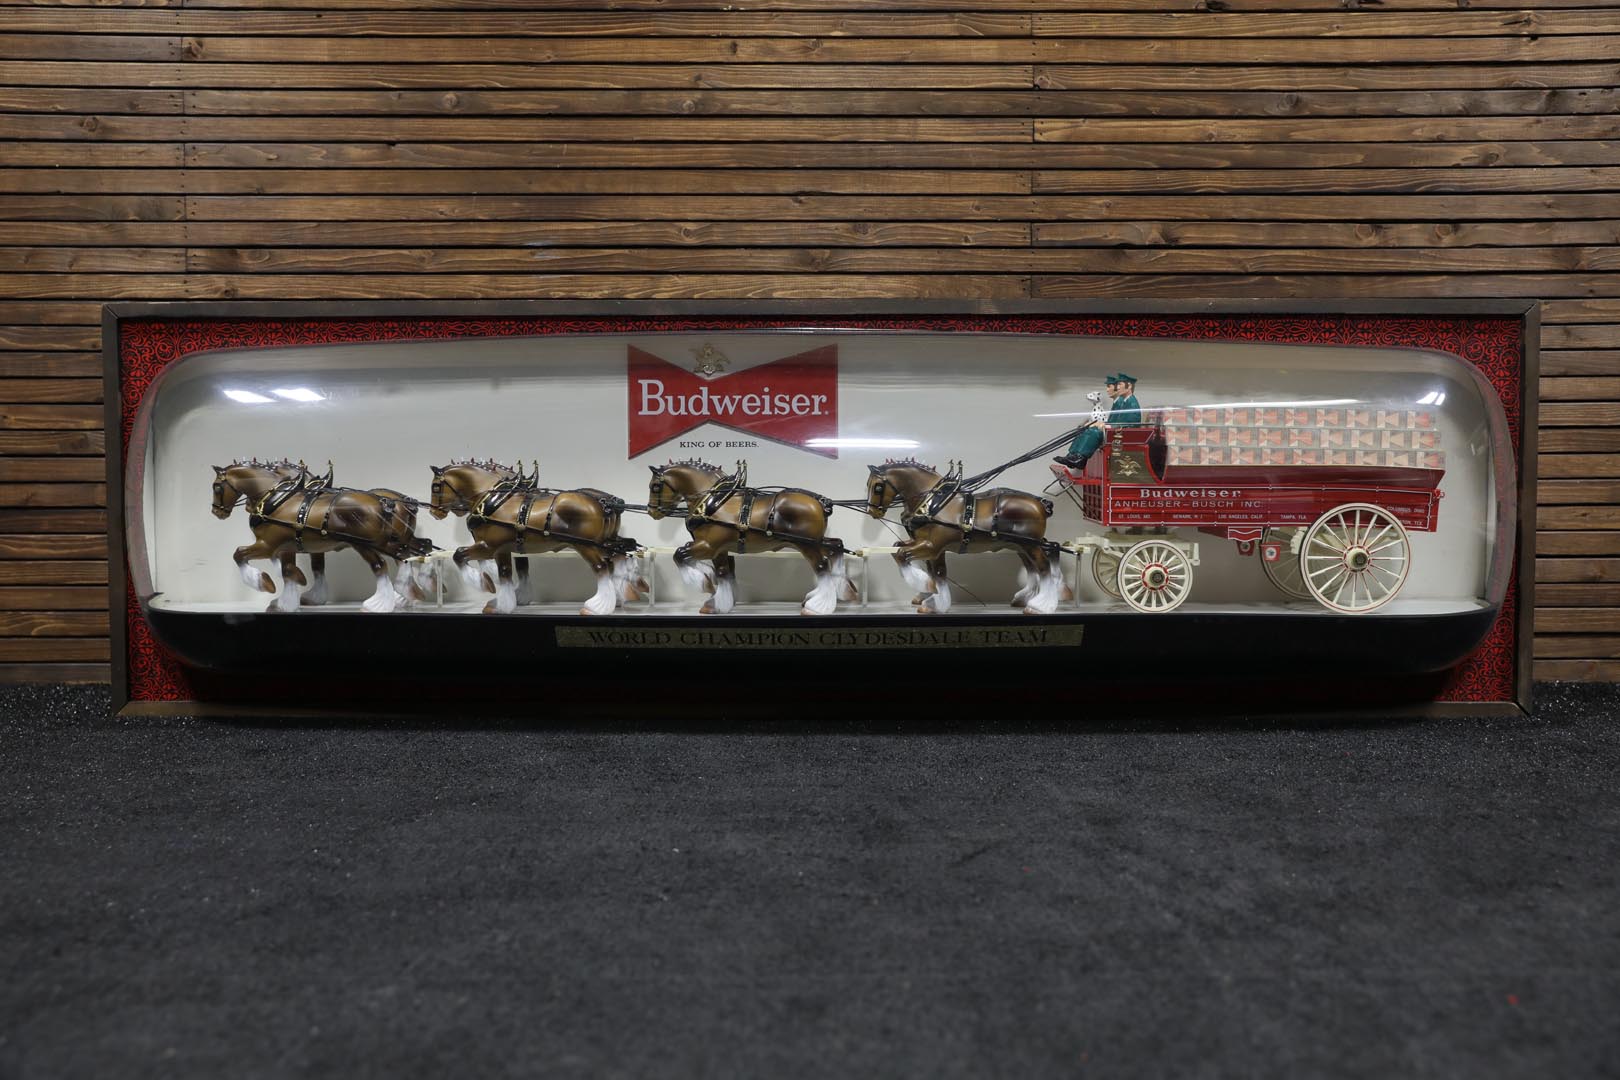 1970s Large Budweiser Beer Wagon and Clydesdale Horses Lighted Sign